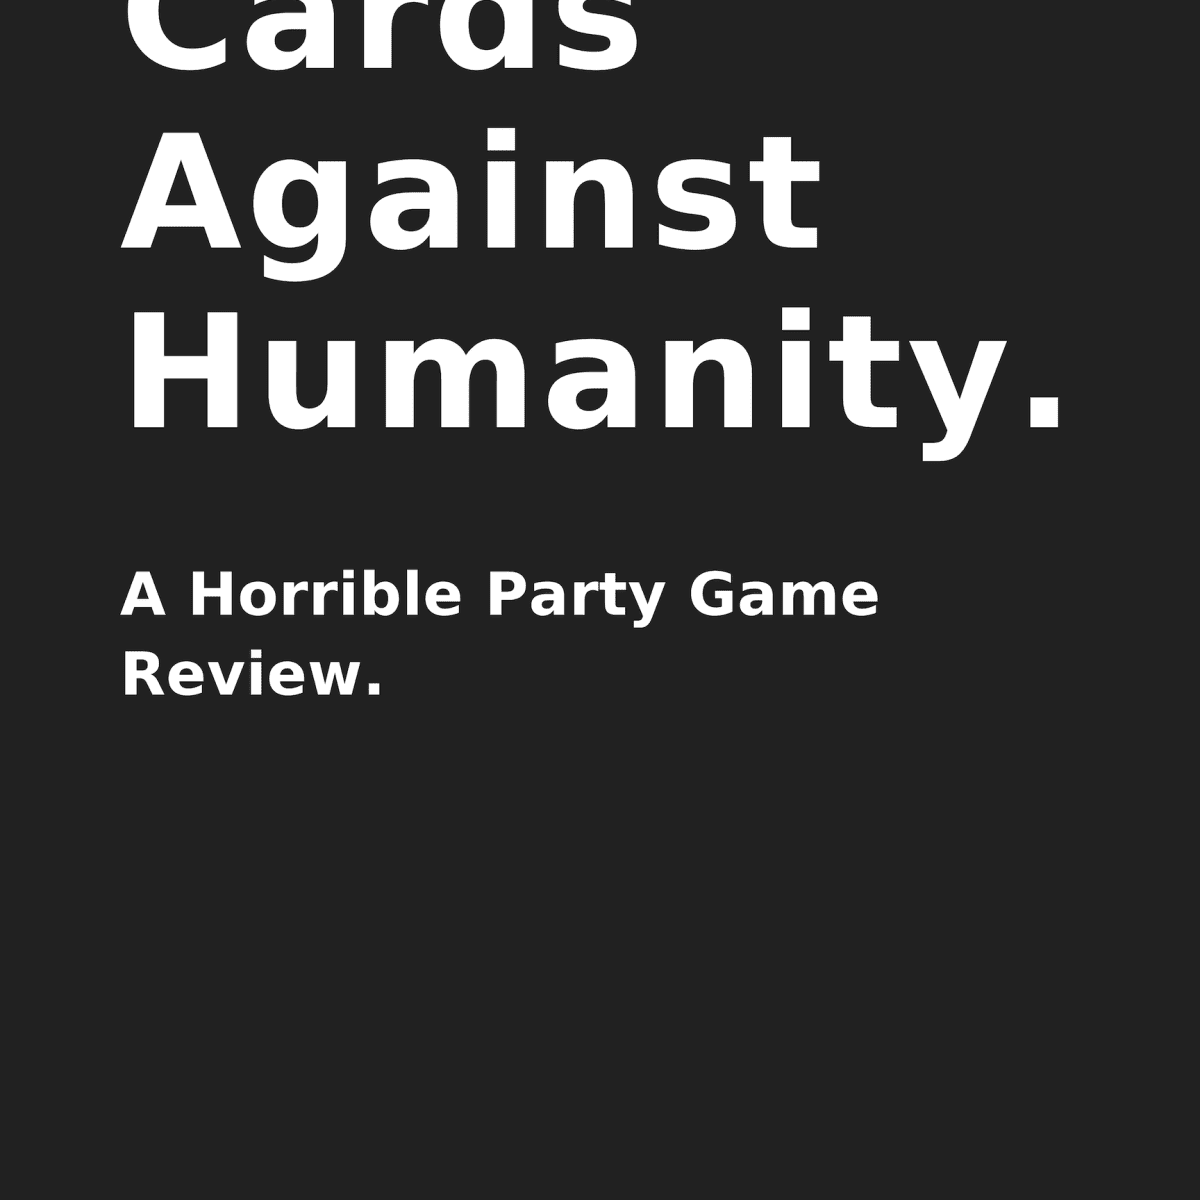 Cards Against Humanity A Game Without Decency Board Game Adults Party Against Humanity Bachelor 14 Wed 